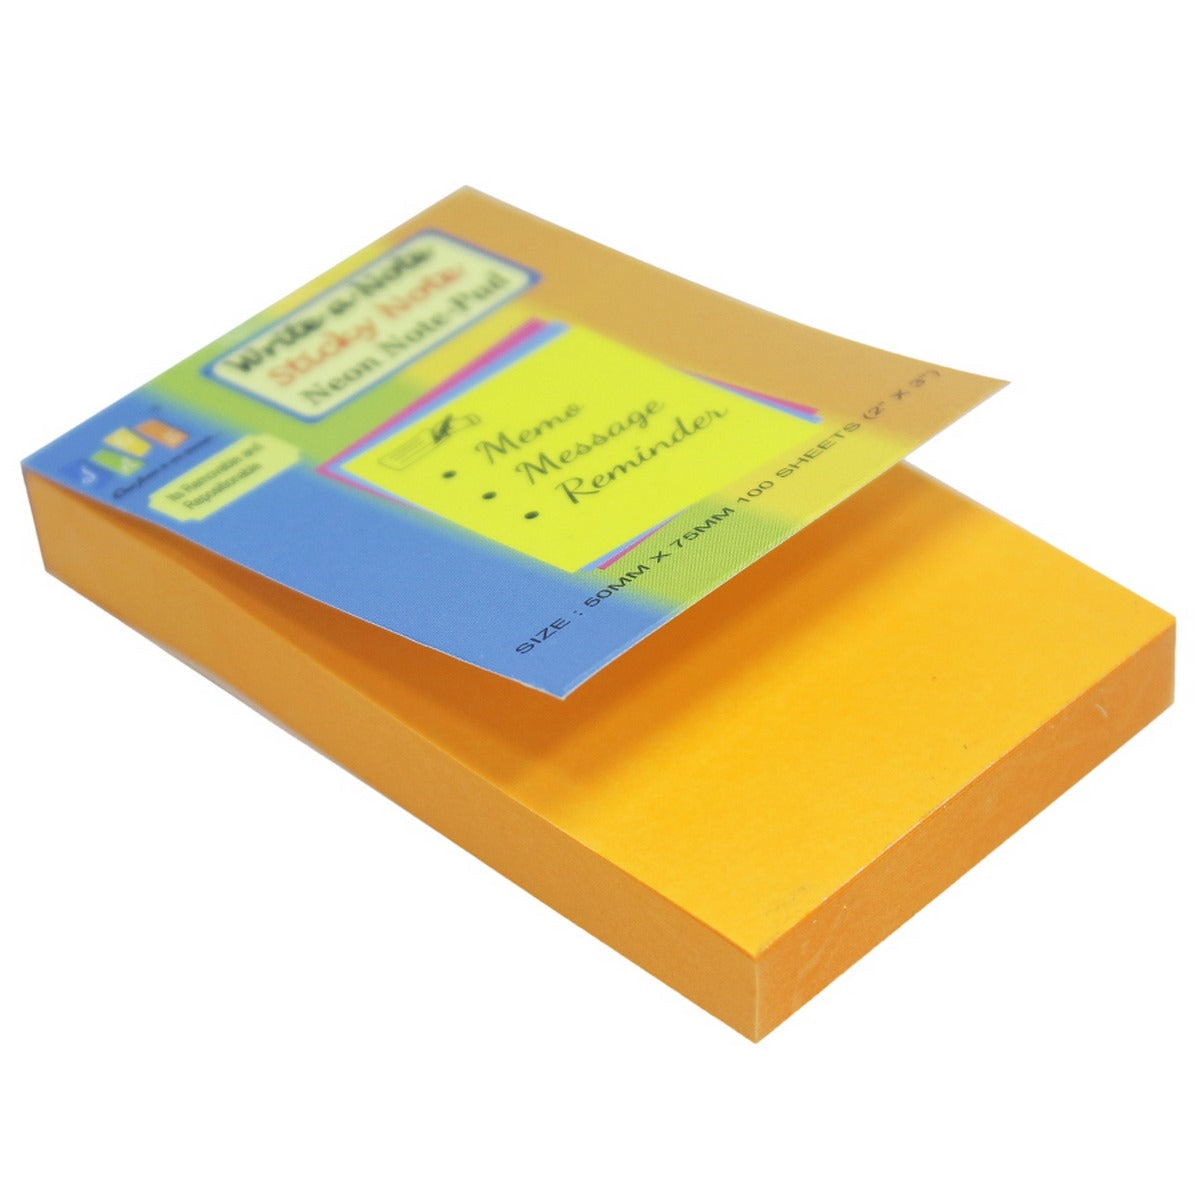 jags-mumbai Sticky Notes Neon Sticky Note Pad (Pack Of 6)